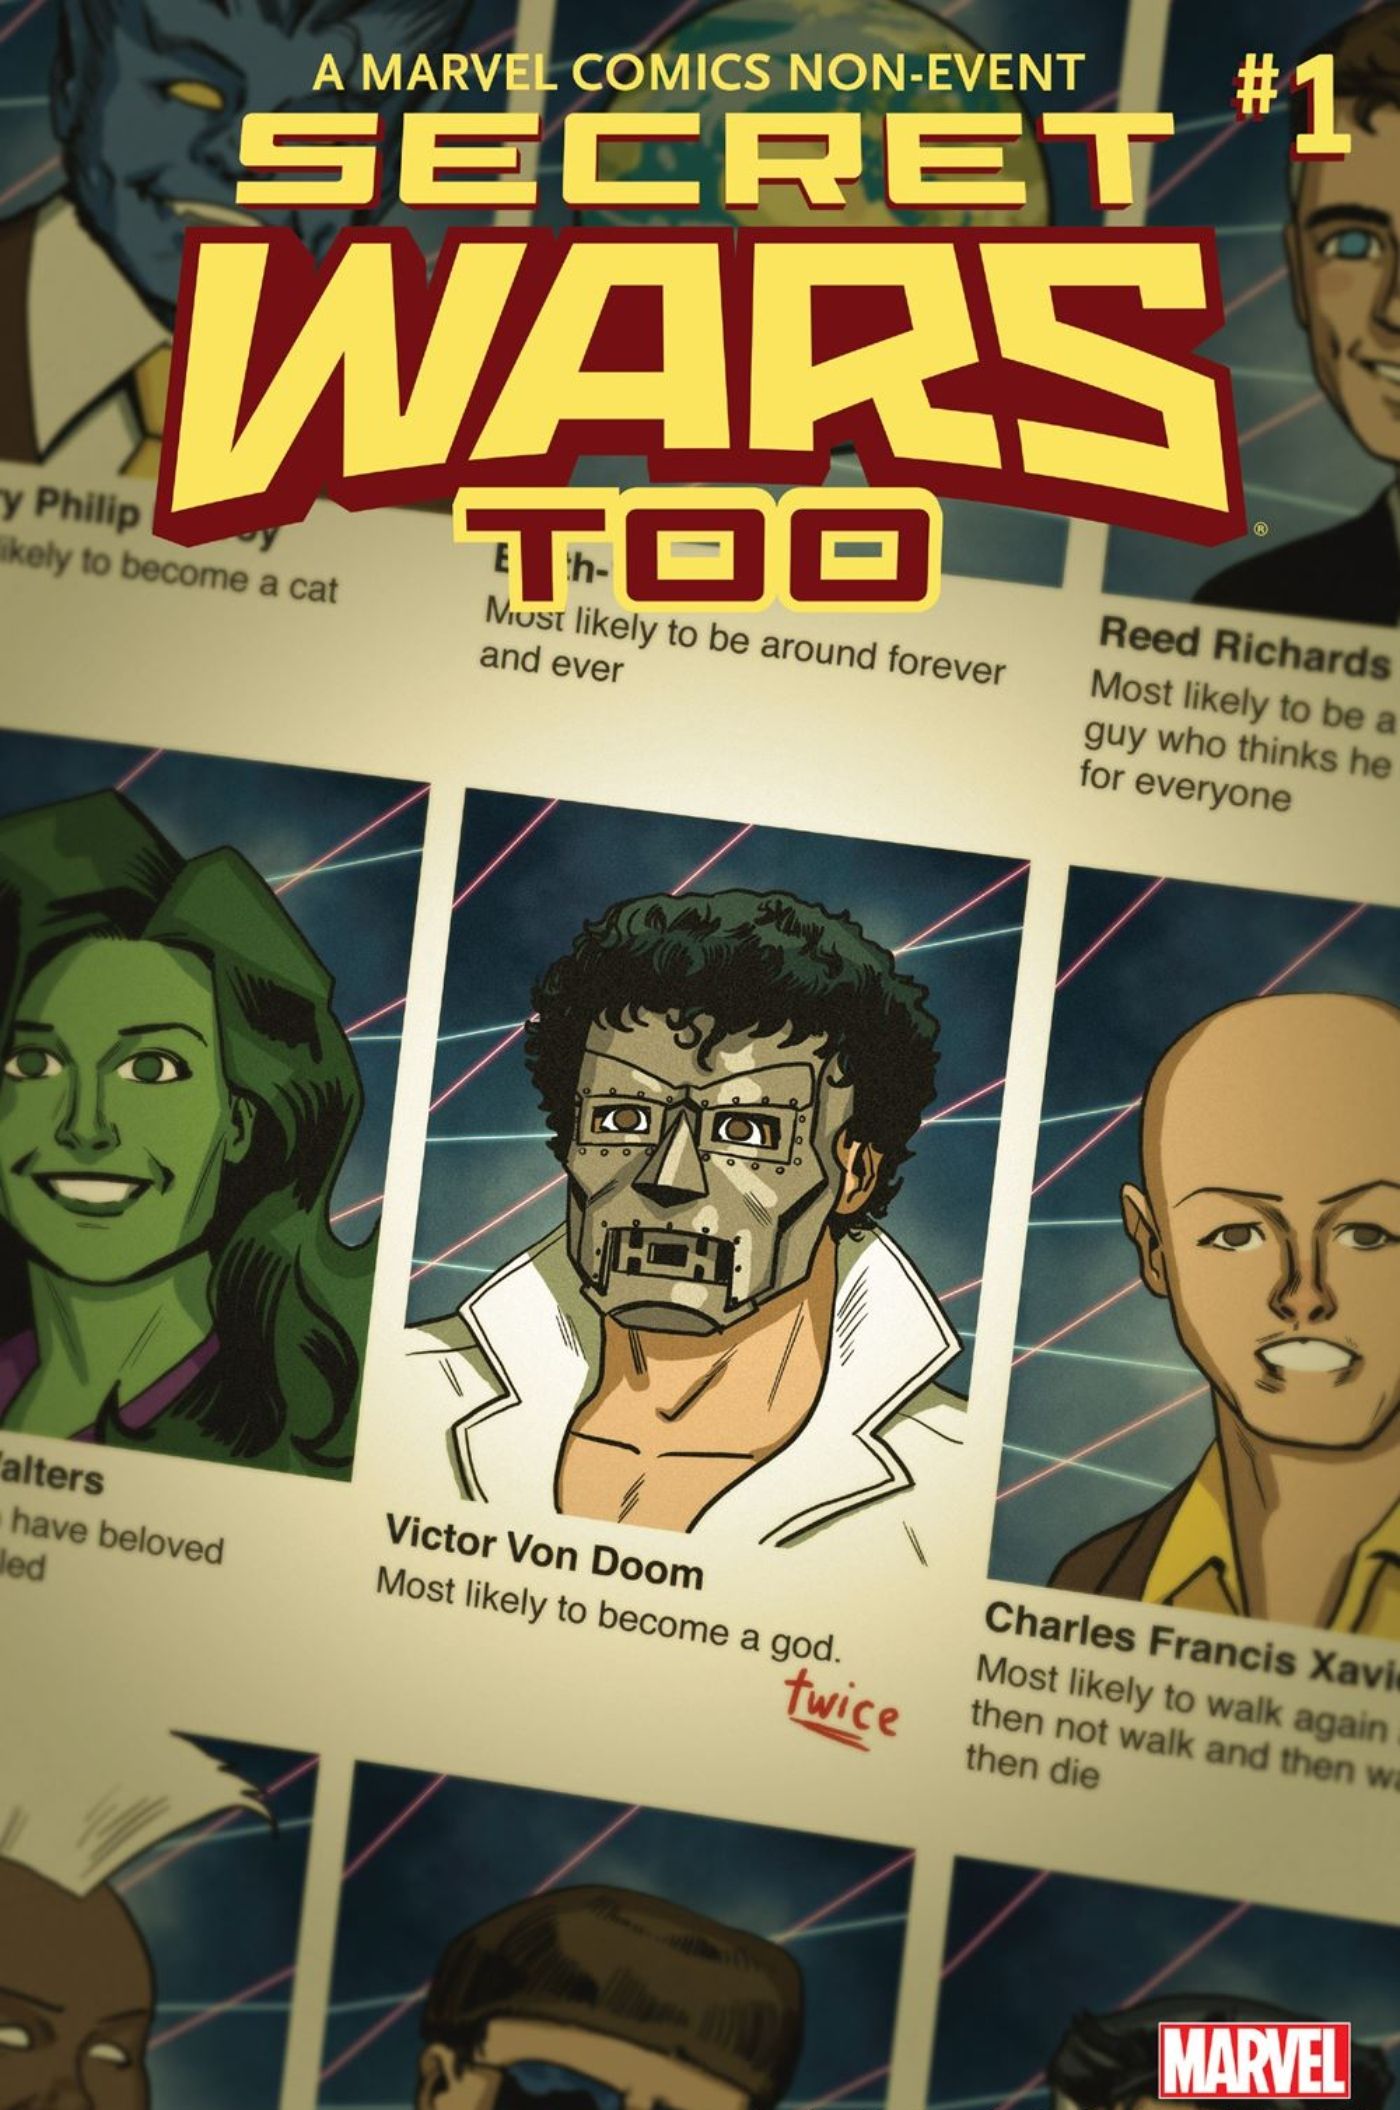 Cover of Marvel Comics' Secret Wars Too featuring gag yearbook photos of Marvel characters.